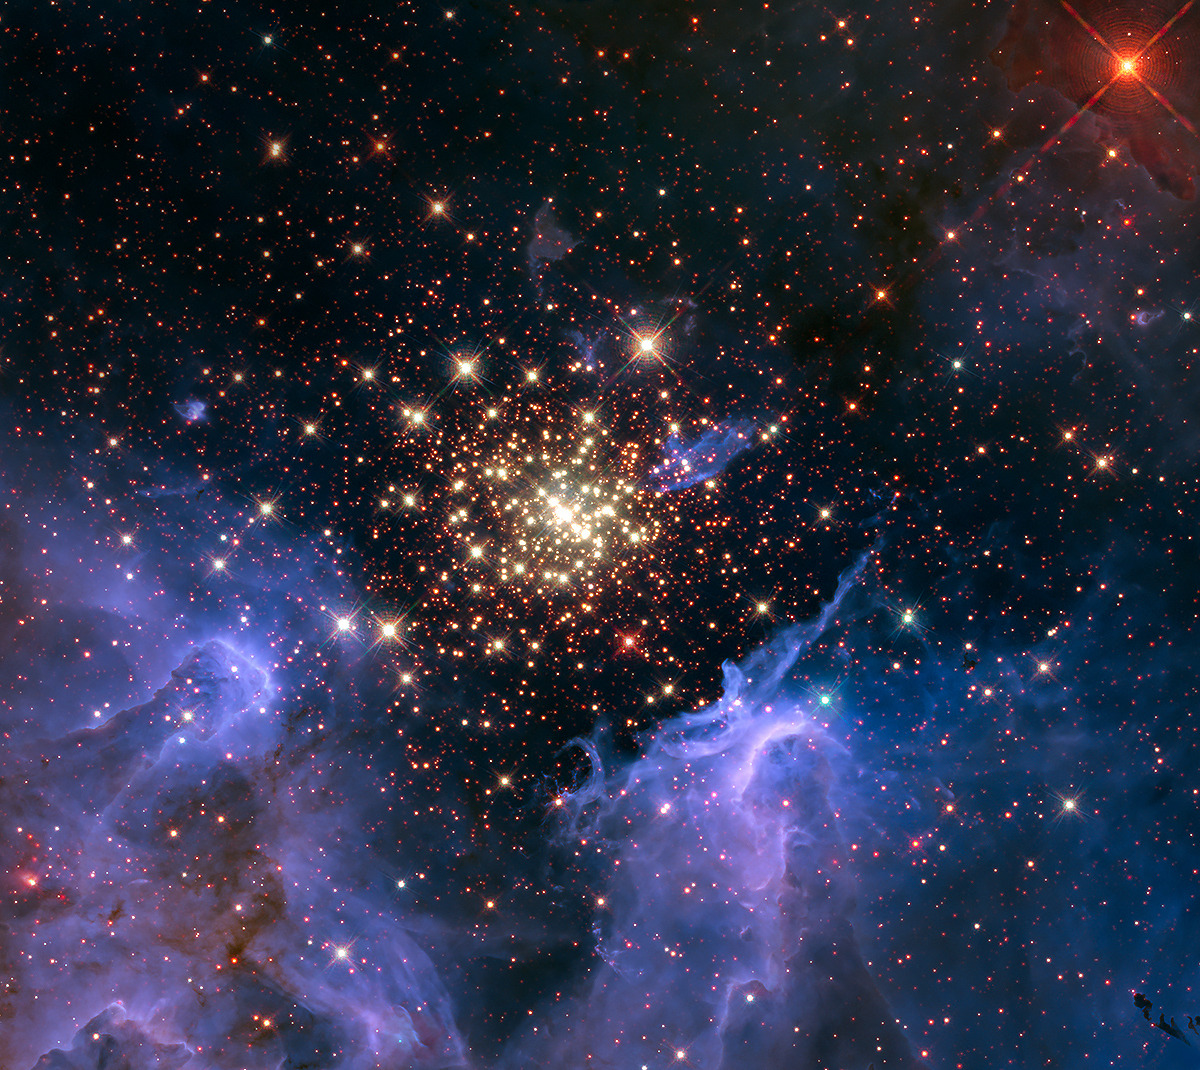 a star cluster in NGC 3603 surrounded by clouds of gas and dust